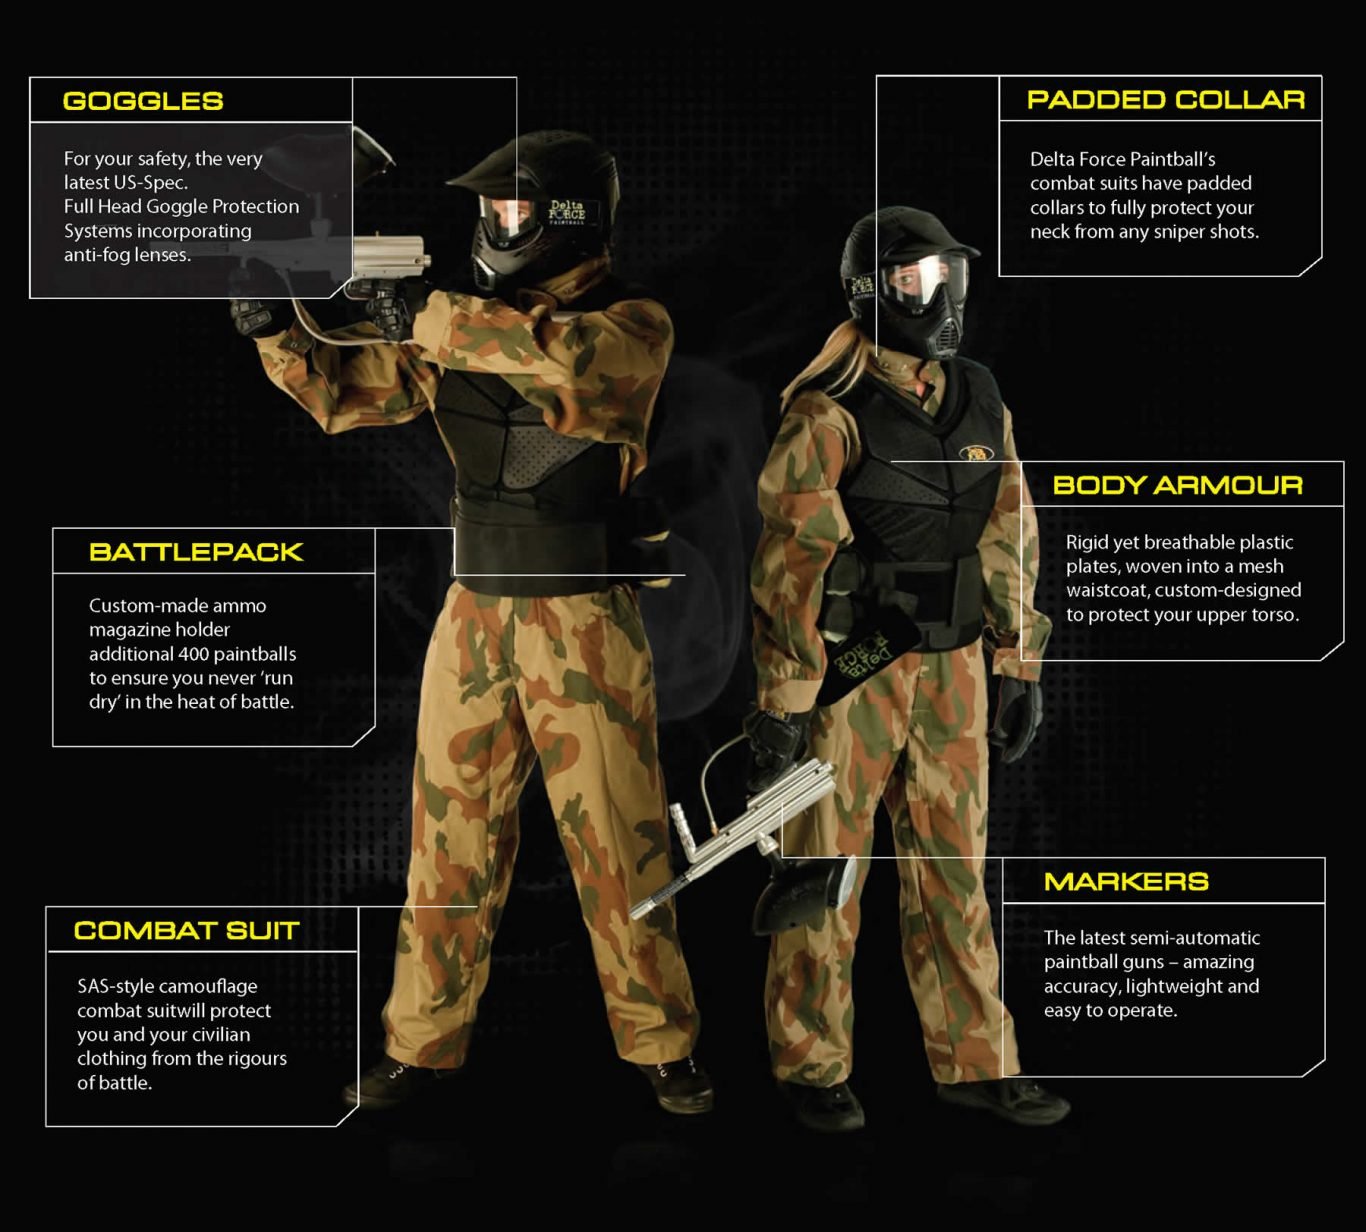 Paintball Goggles - Delta Force Paintball